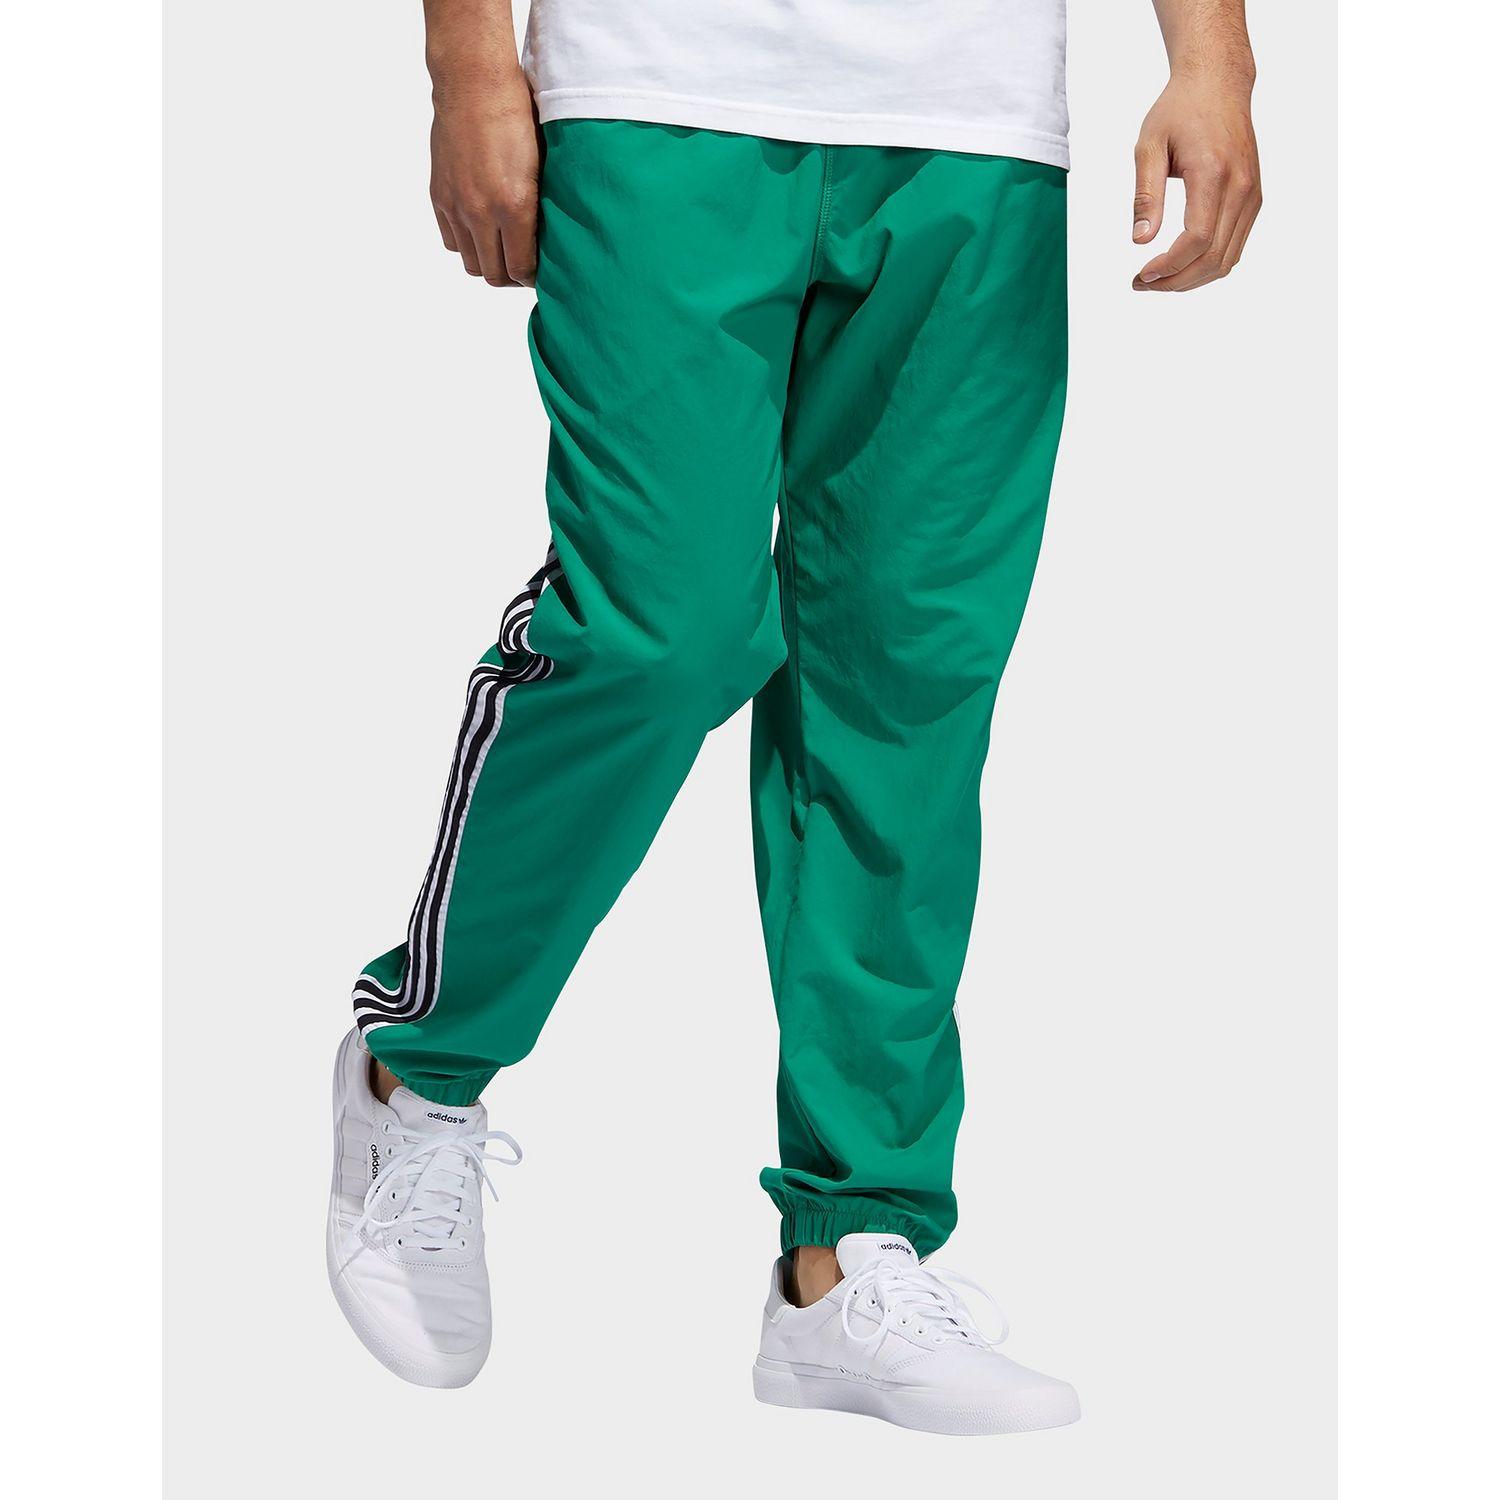 adidas Originals Synthetic Standard 20 Wind Pants in Green - Lyst